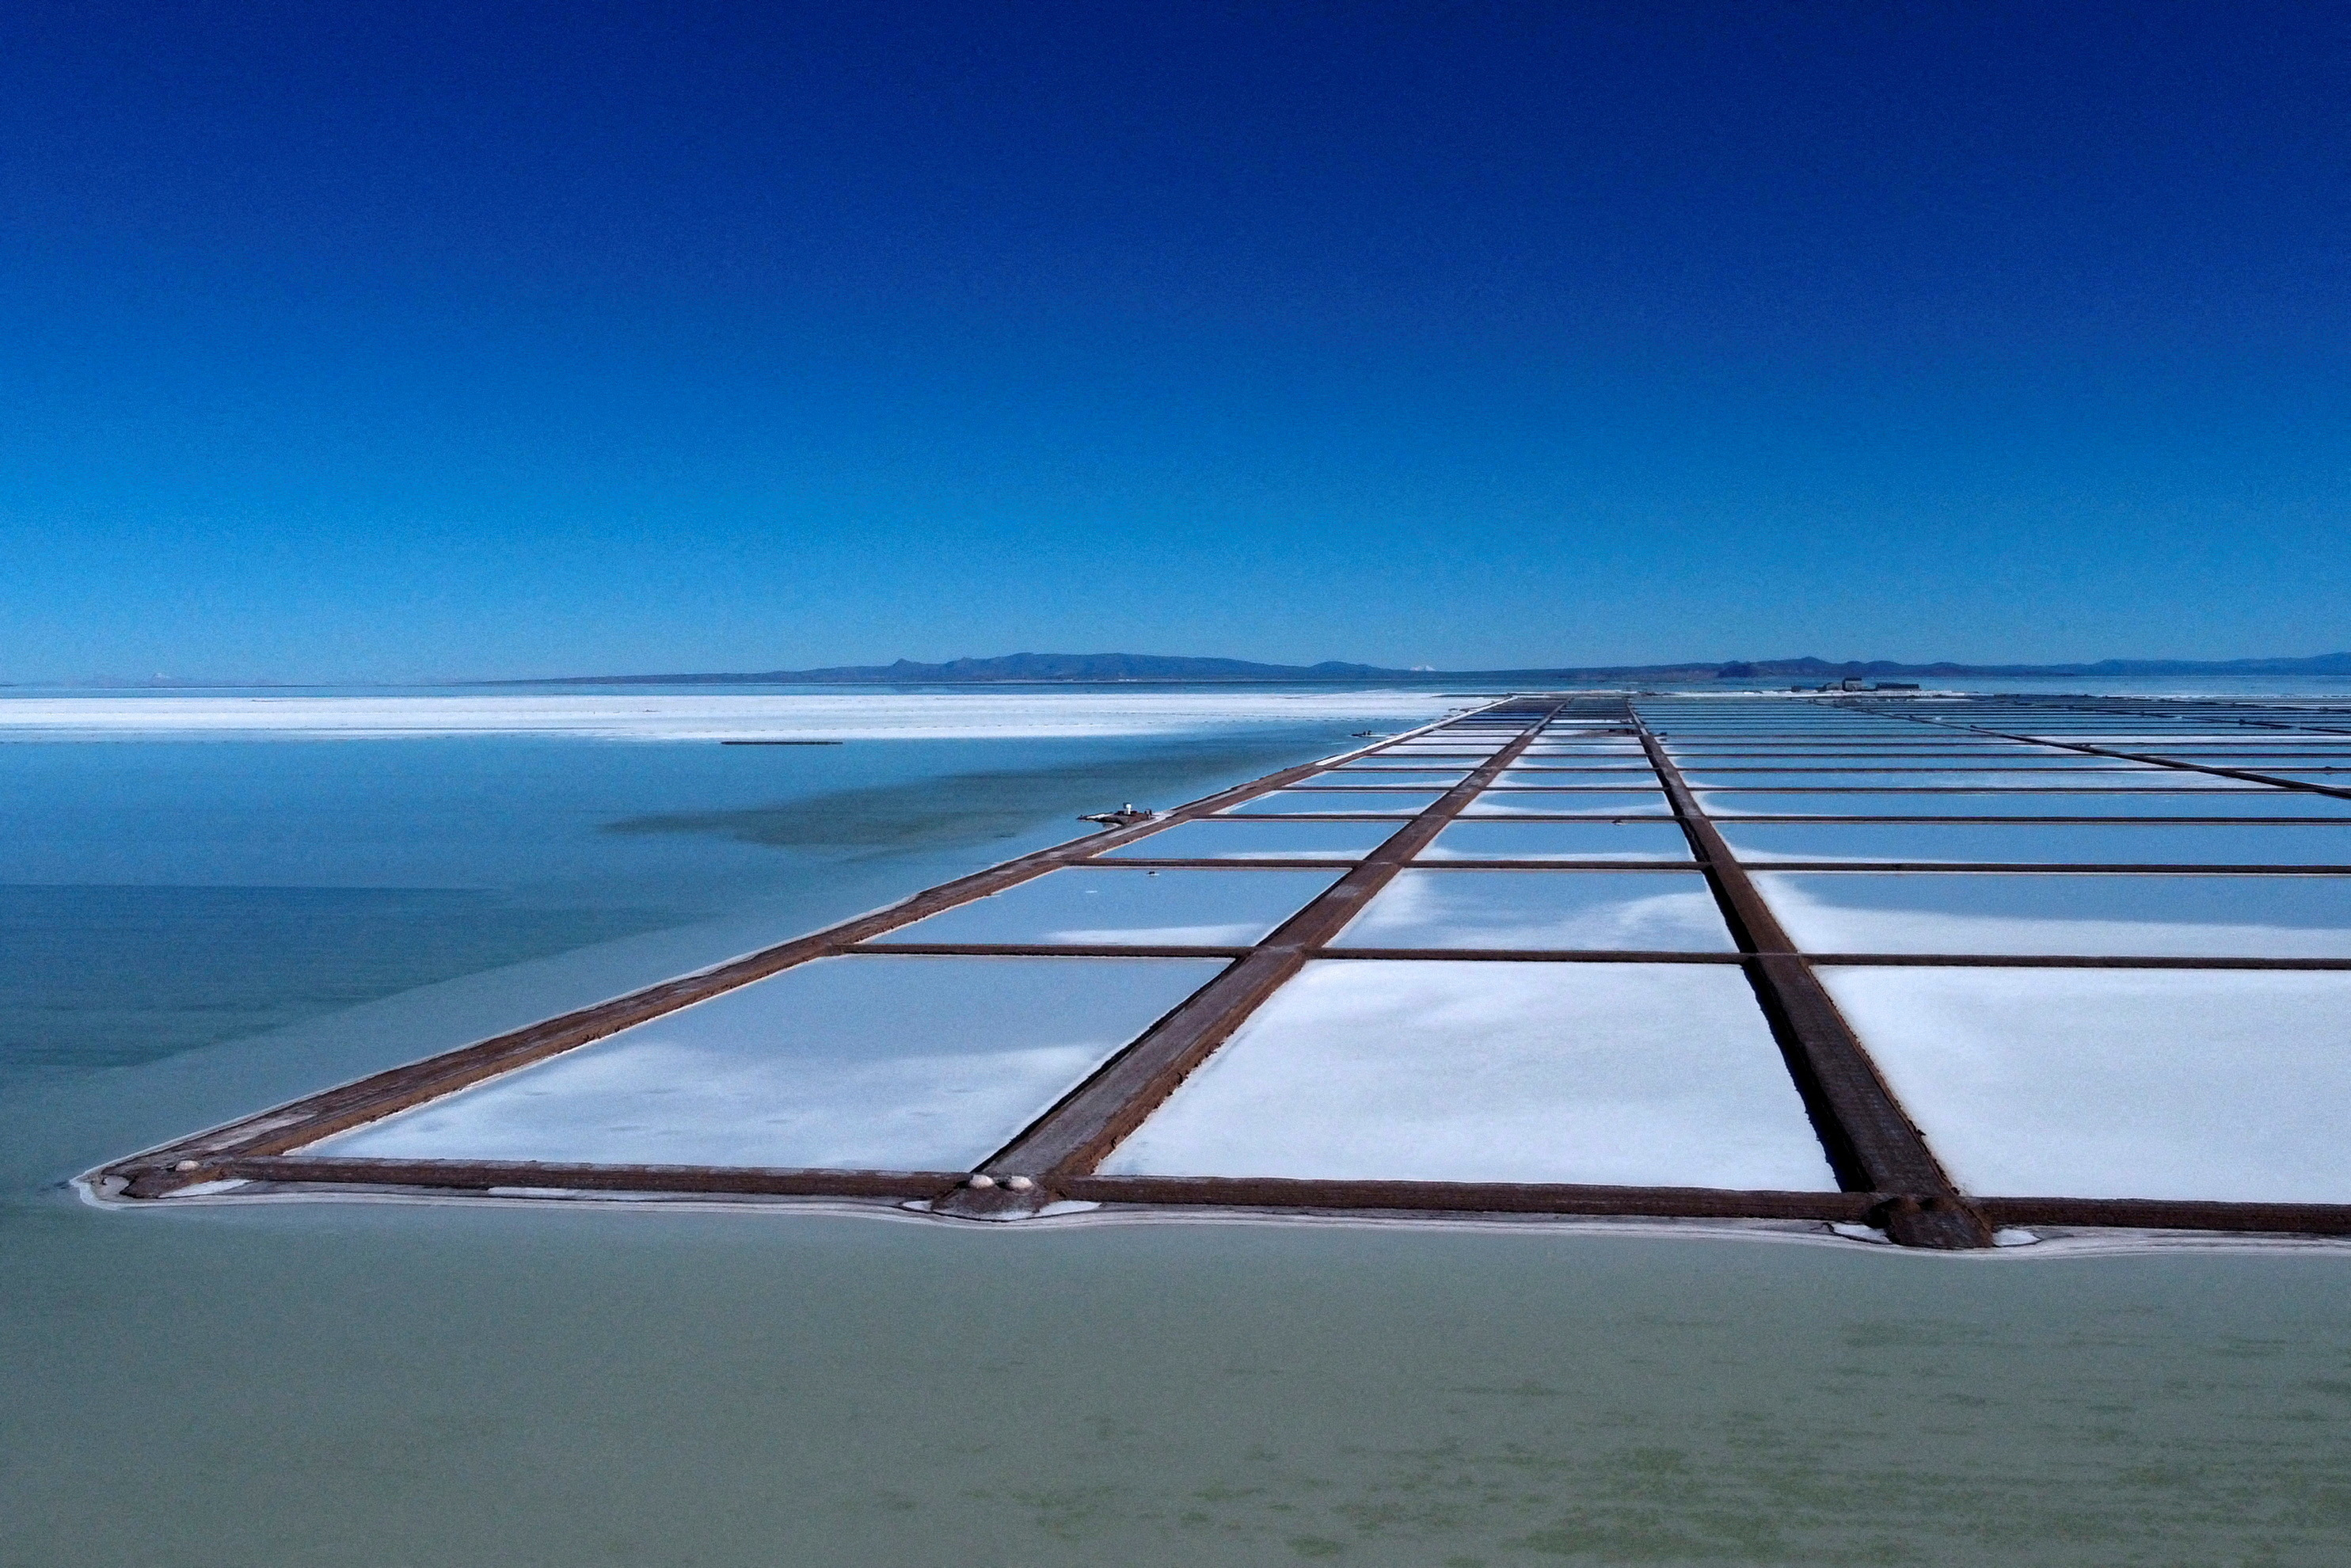 Evaporation pools for extraction of lithium in Bolivia